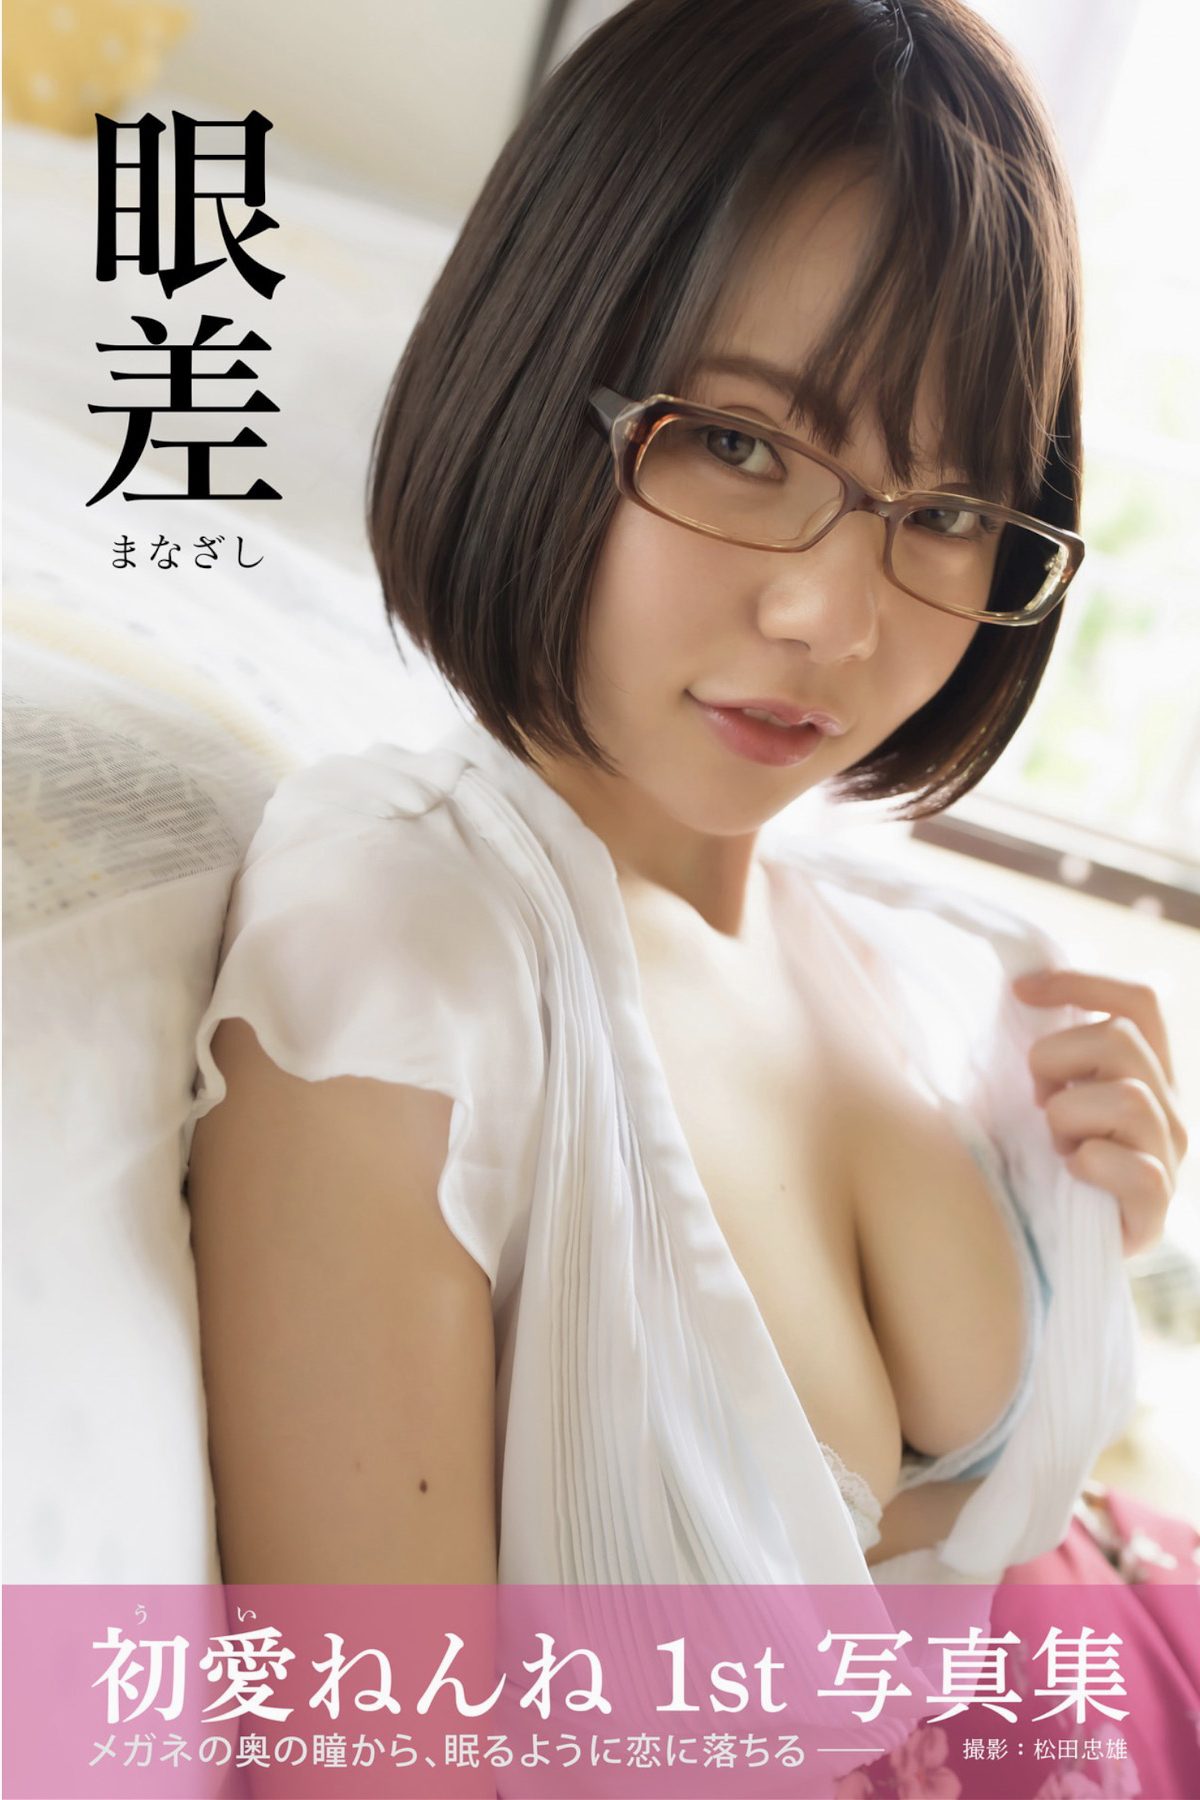 Gravure Photo Book Nenne 初愛ねんね – Eye Difference